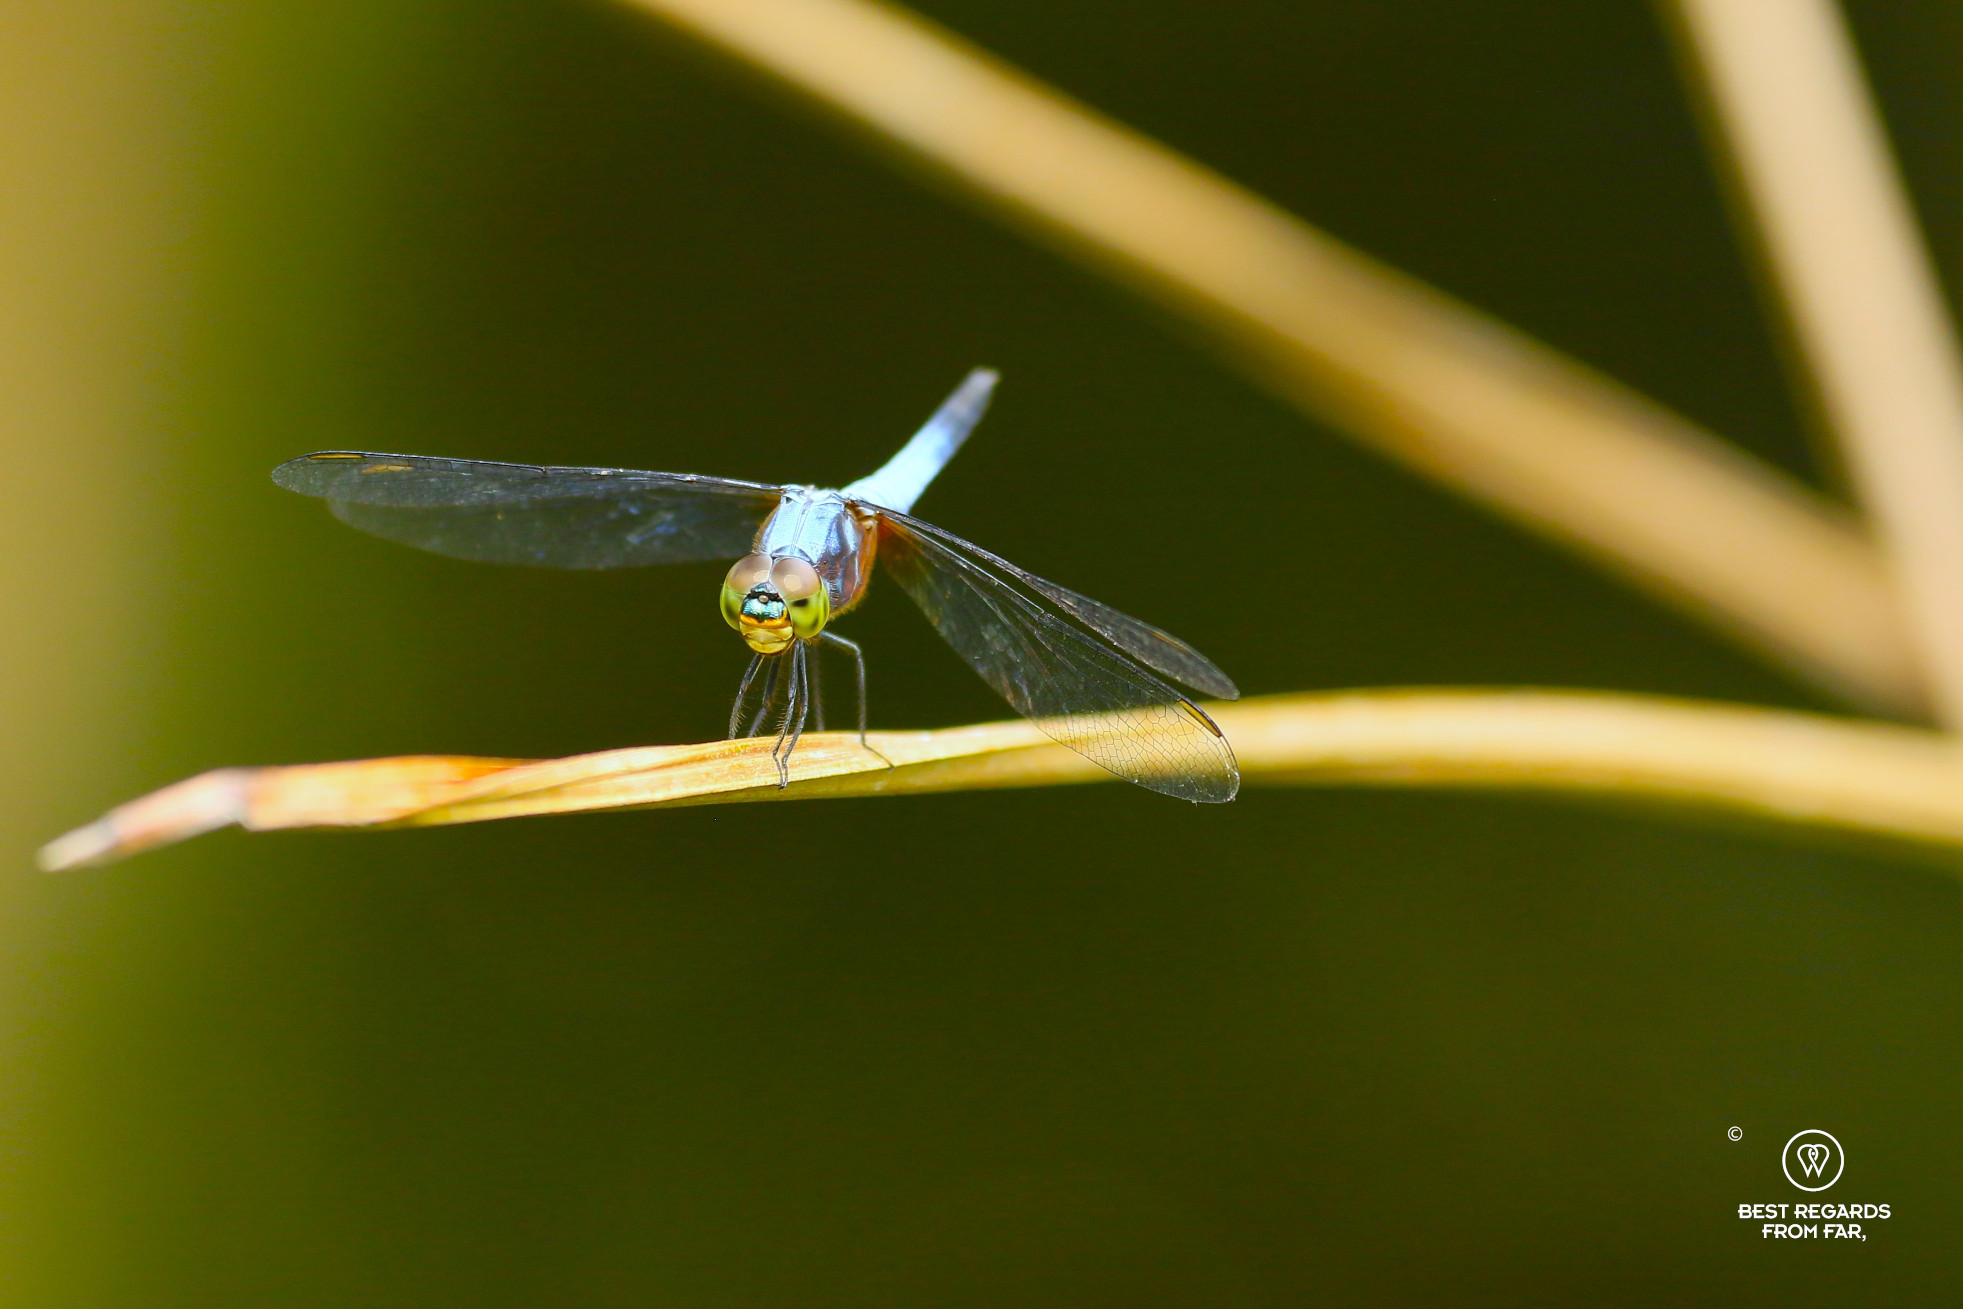 Blue dragonfly with green eyes on a branch.